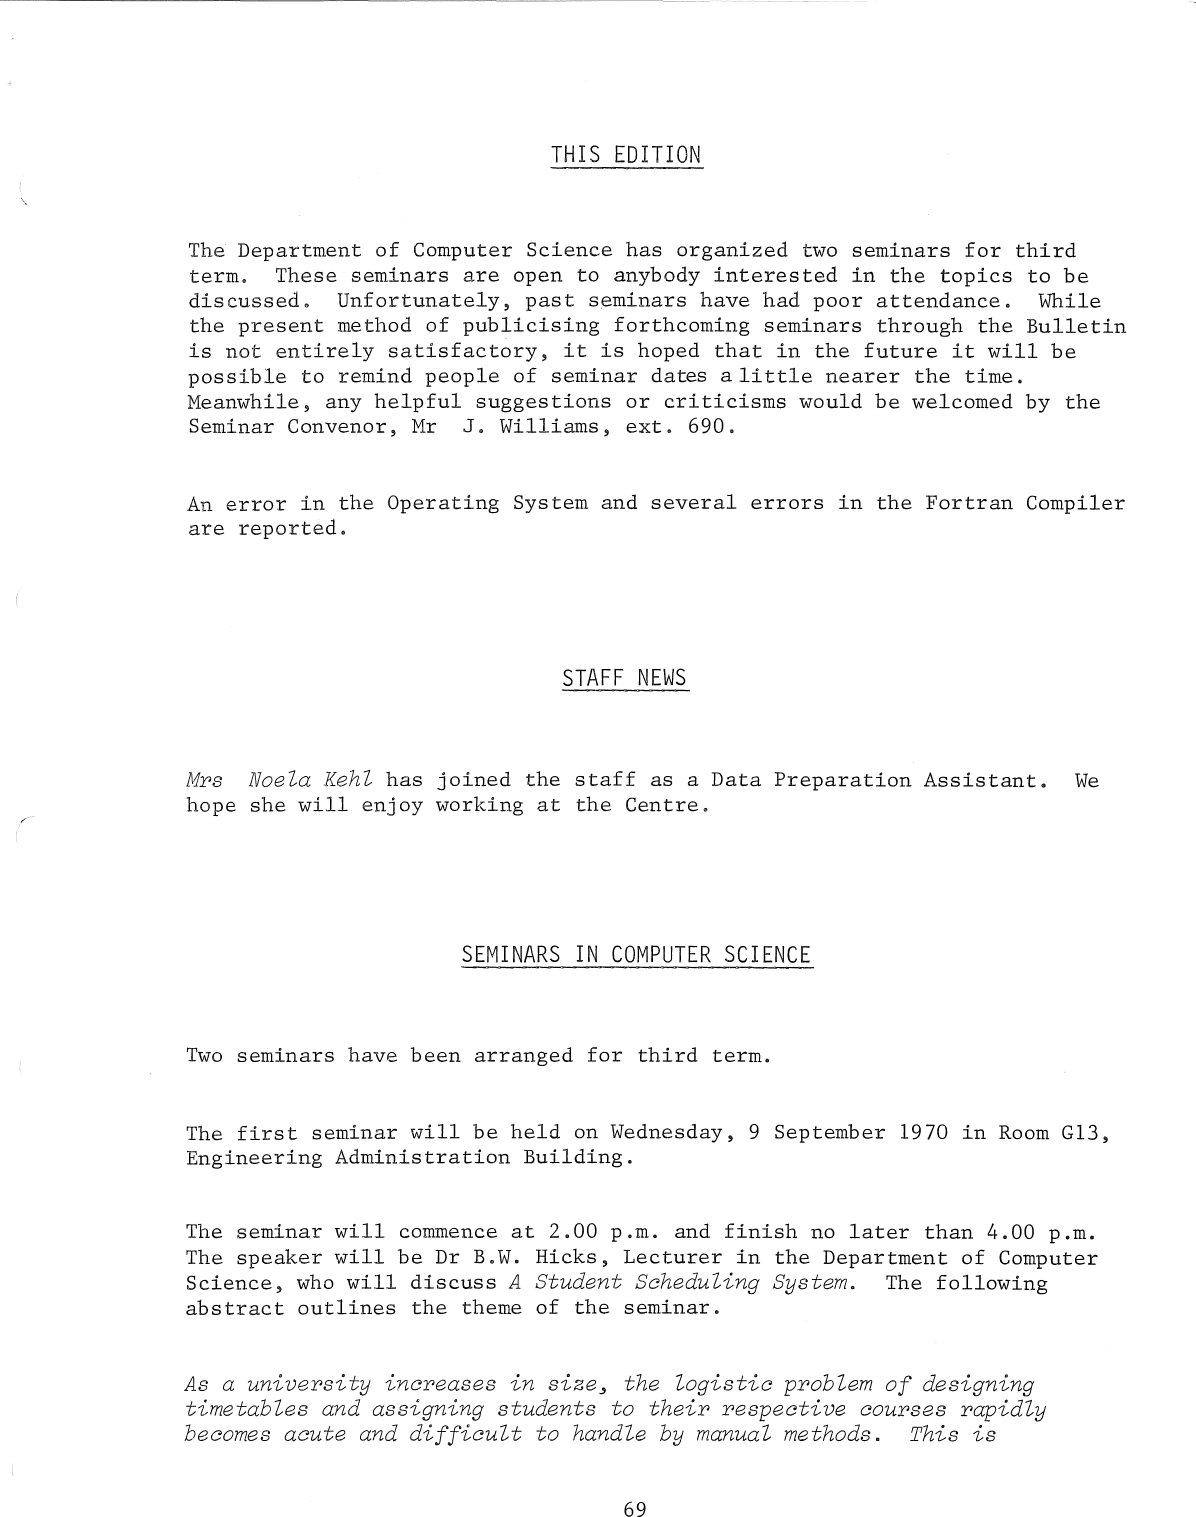 Page 3 of 8 - Computer Centre Bulletin, Volume 3 Number 9, 7th September 1970